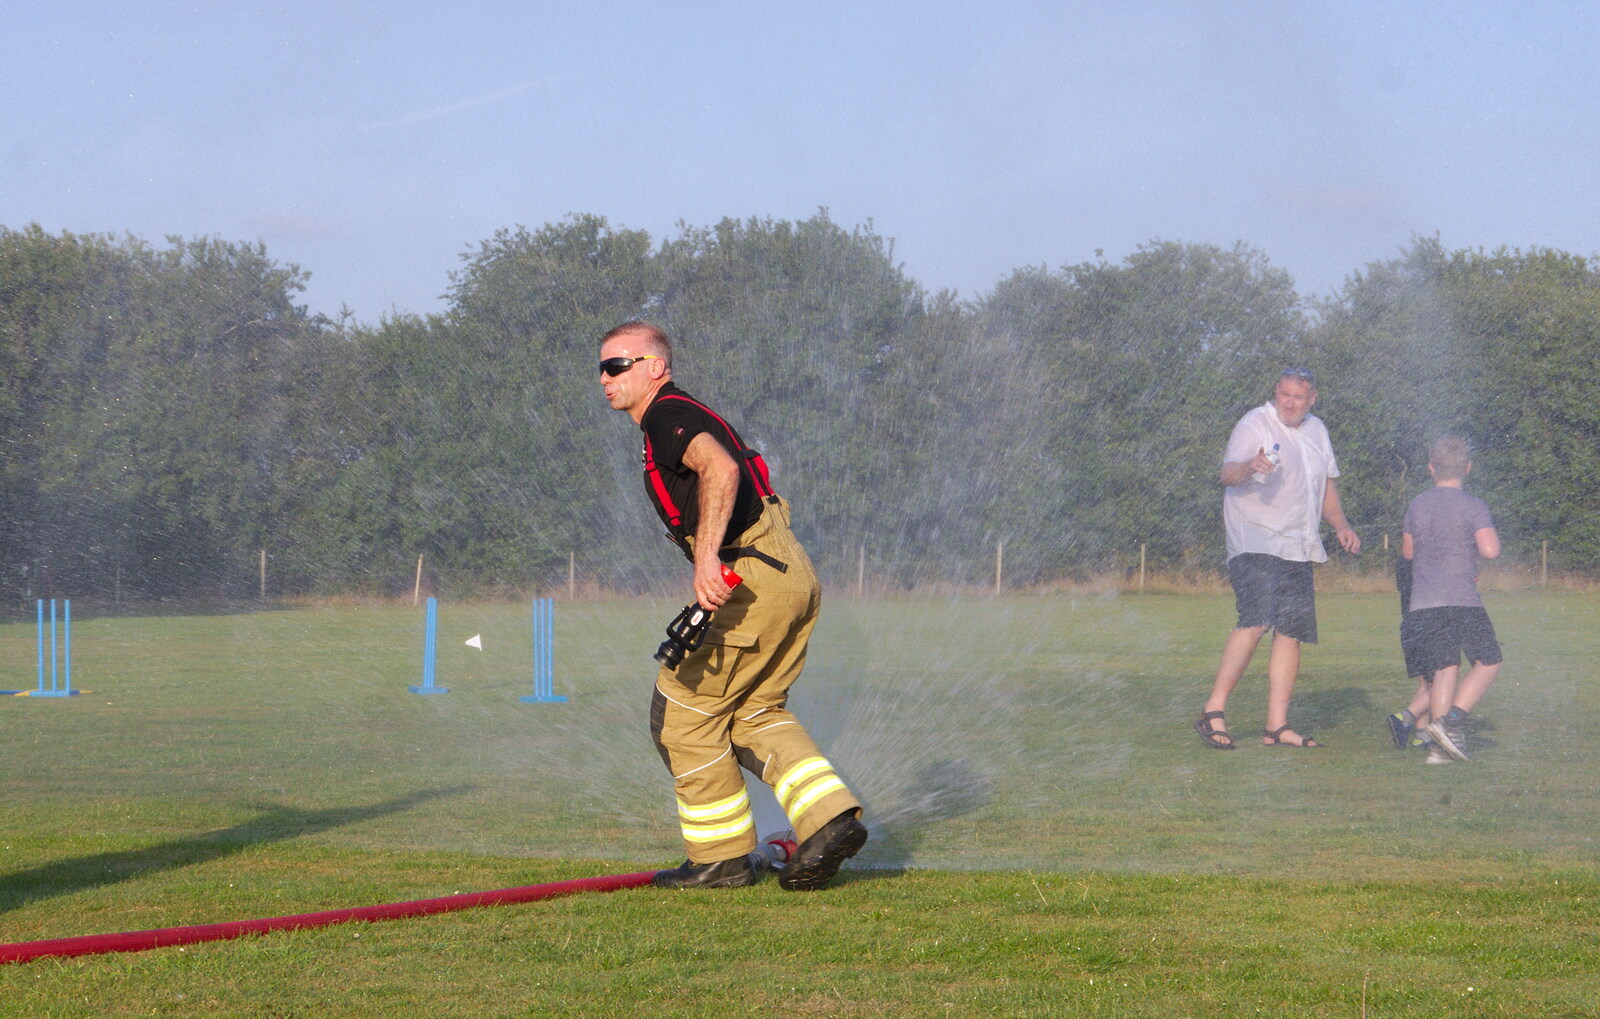 A fire-fighter sets up a wall of spray from A Water Fight with a Fire Engine, Eye Cricket Club, Suffolk - 5th August 2019